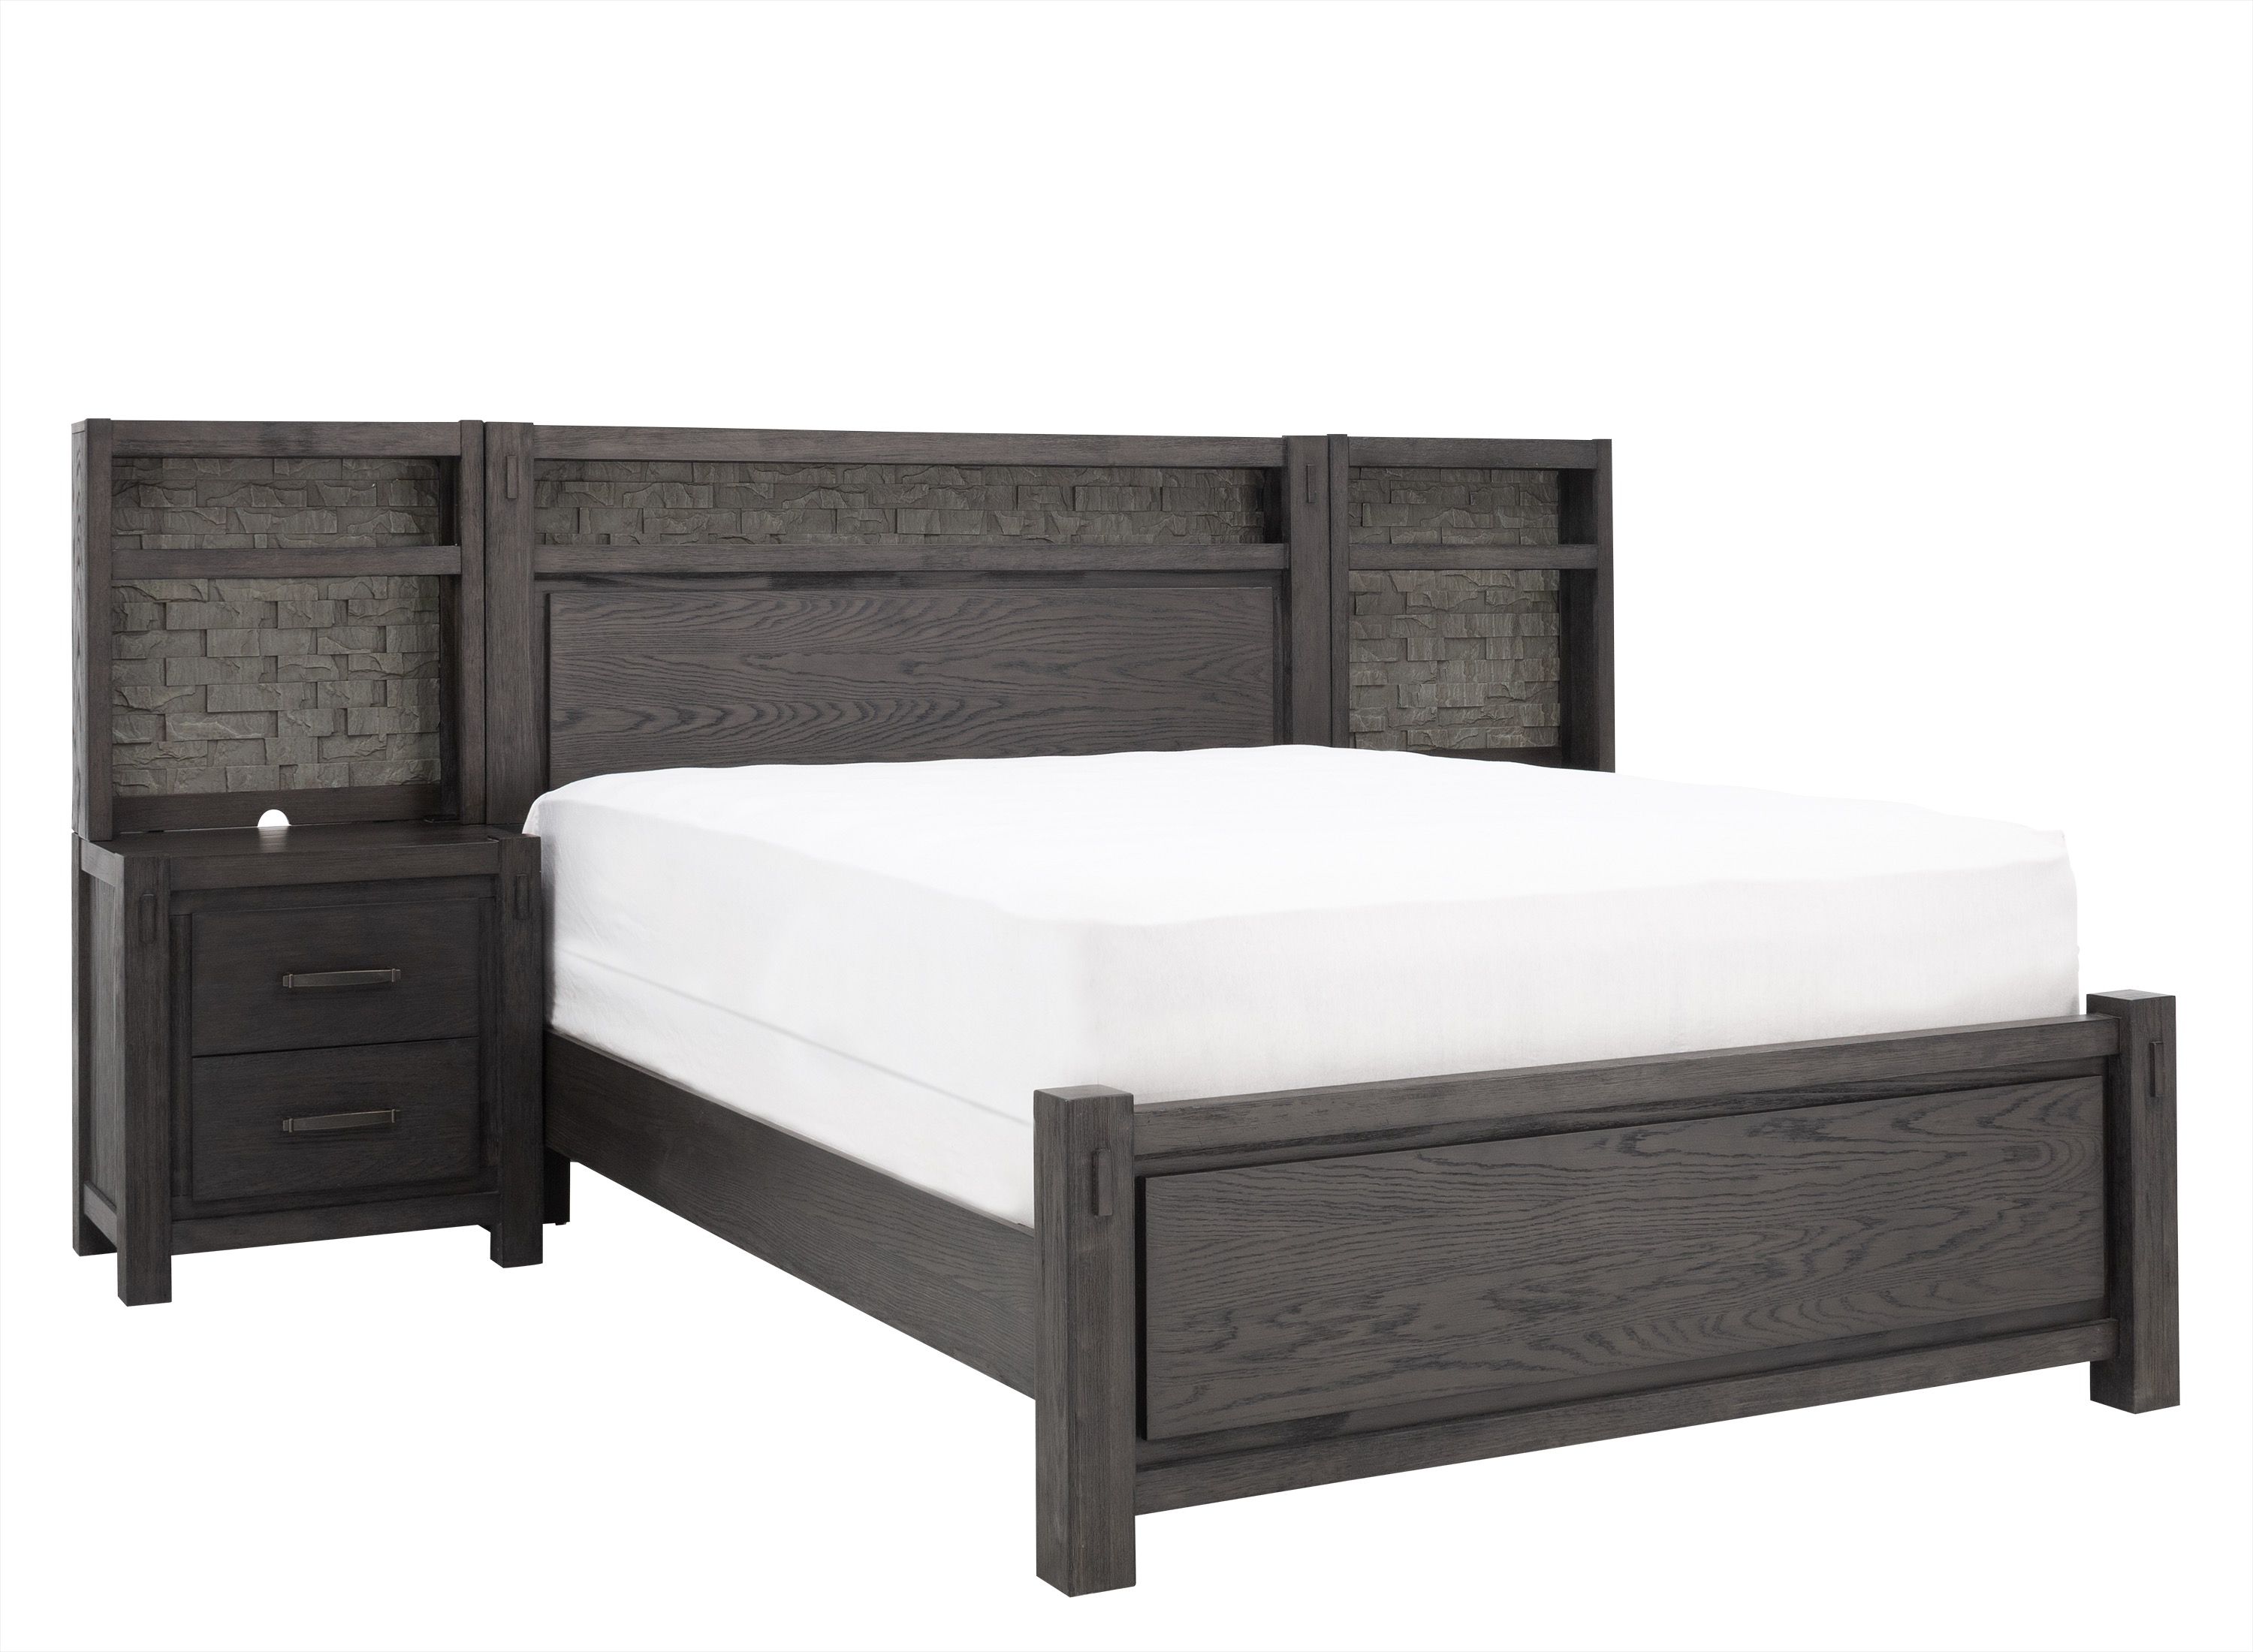 Rockwell Wall Bed Raymour Flanigan, Raymour And Flanigan King Bed Frame